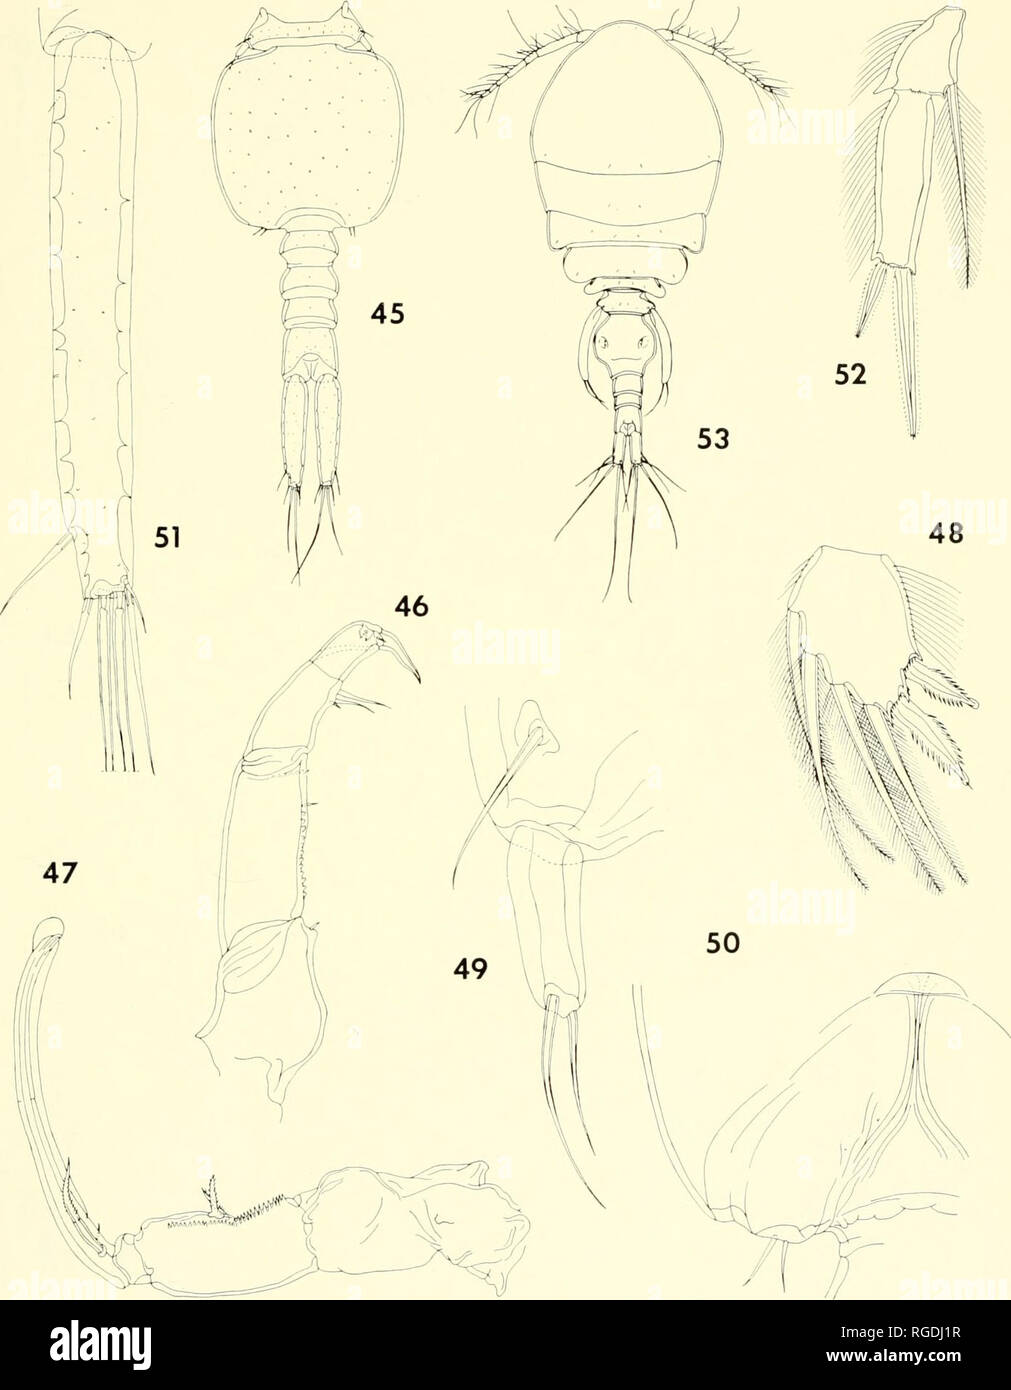 . Bulletin of the Museum of Comparative Zoology at Harvard College. Zoology. CoPEPODS FROM CoRALs LN MADAGASCAR • Hiimes and Ho 389. Figures 45-50. Lichomolgus digitatus n. sp., male (continued). 45, urosome, dorsal (G); 46, second antenna, inner (E); 47, maxilliped, inner [H); 48, lost segment of endopod of leg 1, anterior (D); 49, leg 5, dorsal (C); 50, leg 6, ventral Figures 51-52. Lichomolgus digitatus n. sp., female, from Porites. 51, caudal ramus, dorsal (E); 52, endopod of leg 4, anterior (E). Figure 53. Lichomolgus prolixipes n. sp., female. 53, body, dorsal (A).. Please note that thes Stock Photo